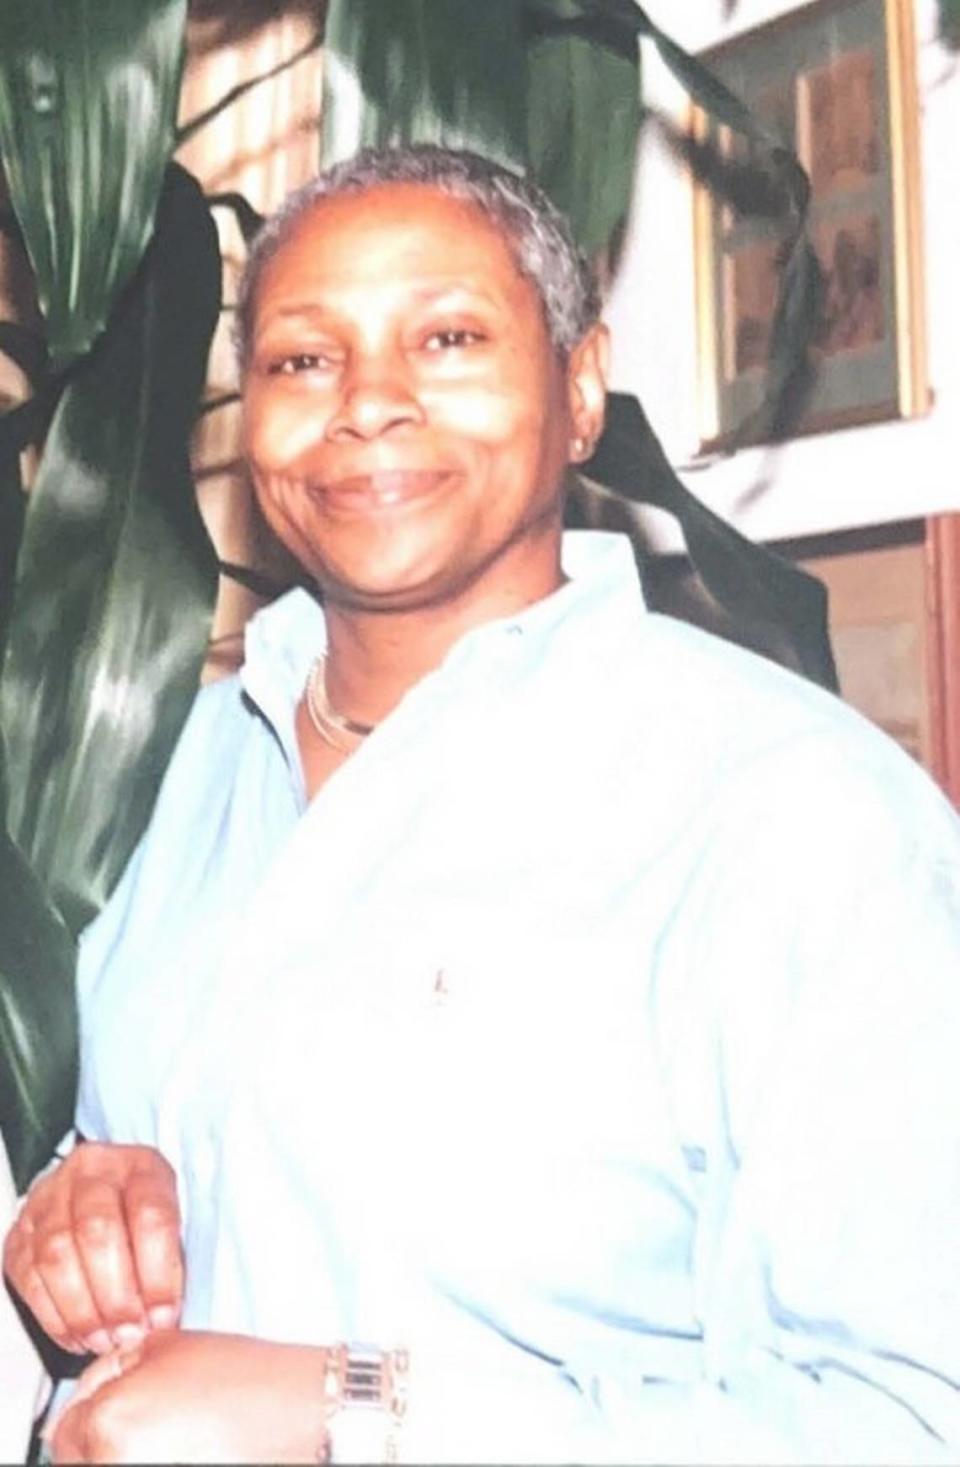 Pamela Vaughn, mother and security systems software engineer, died June 25. She was 70. Vaughn family